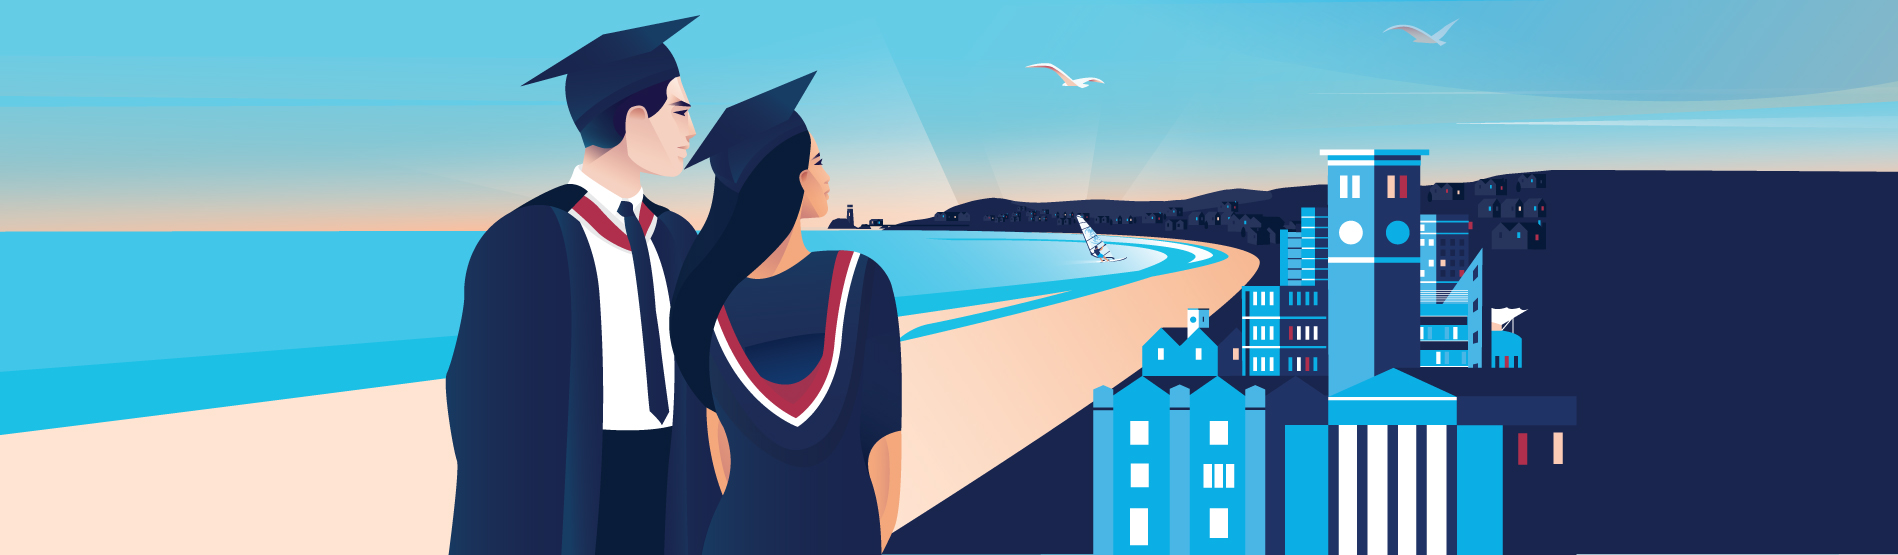 Illustrative drawing of two students in their cap and gowns looking across mumbles, with images of iconic University buildings. 